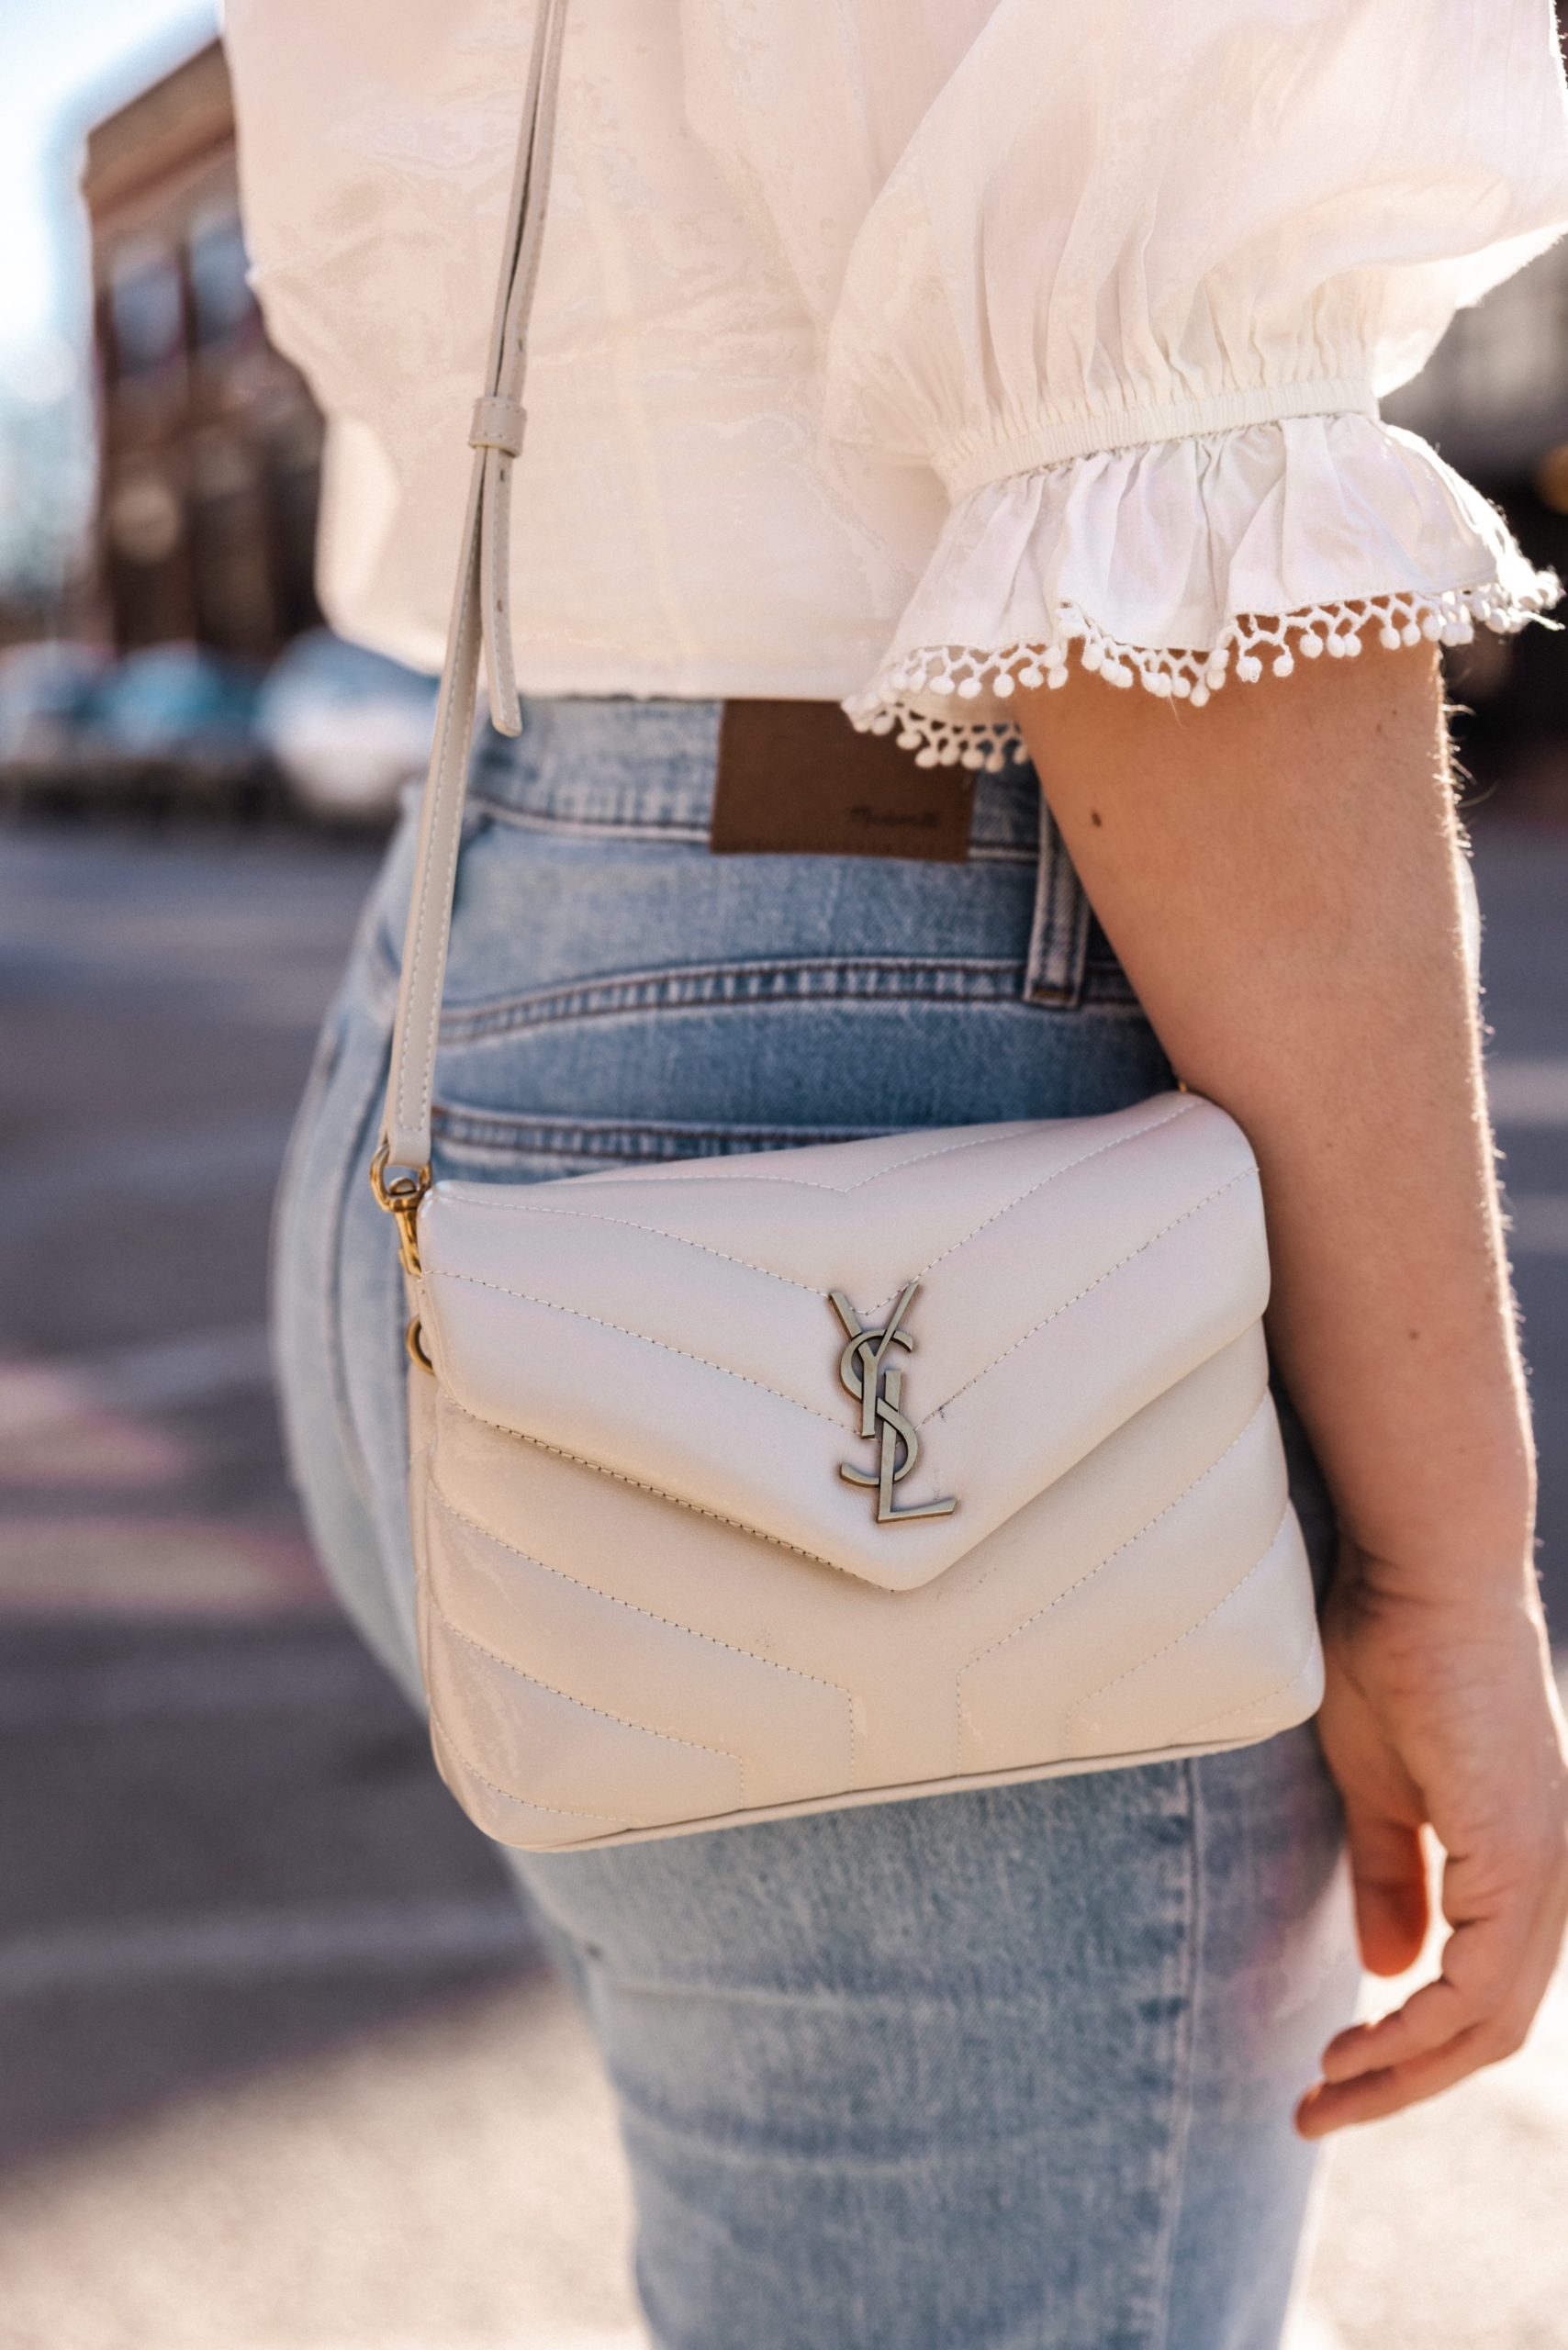 BEST MINI BAG EVER? YSL LouLou Toy Bag Review & Outfit Styling